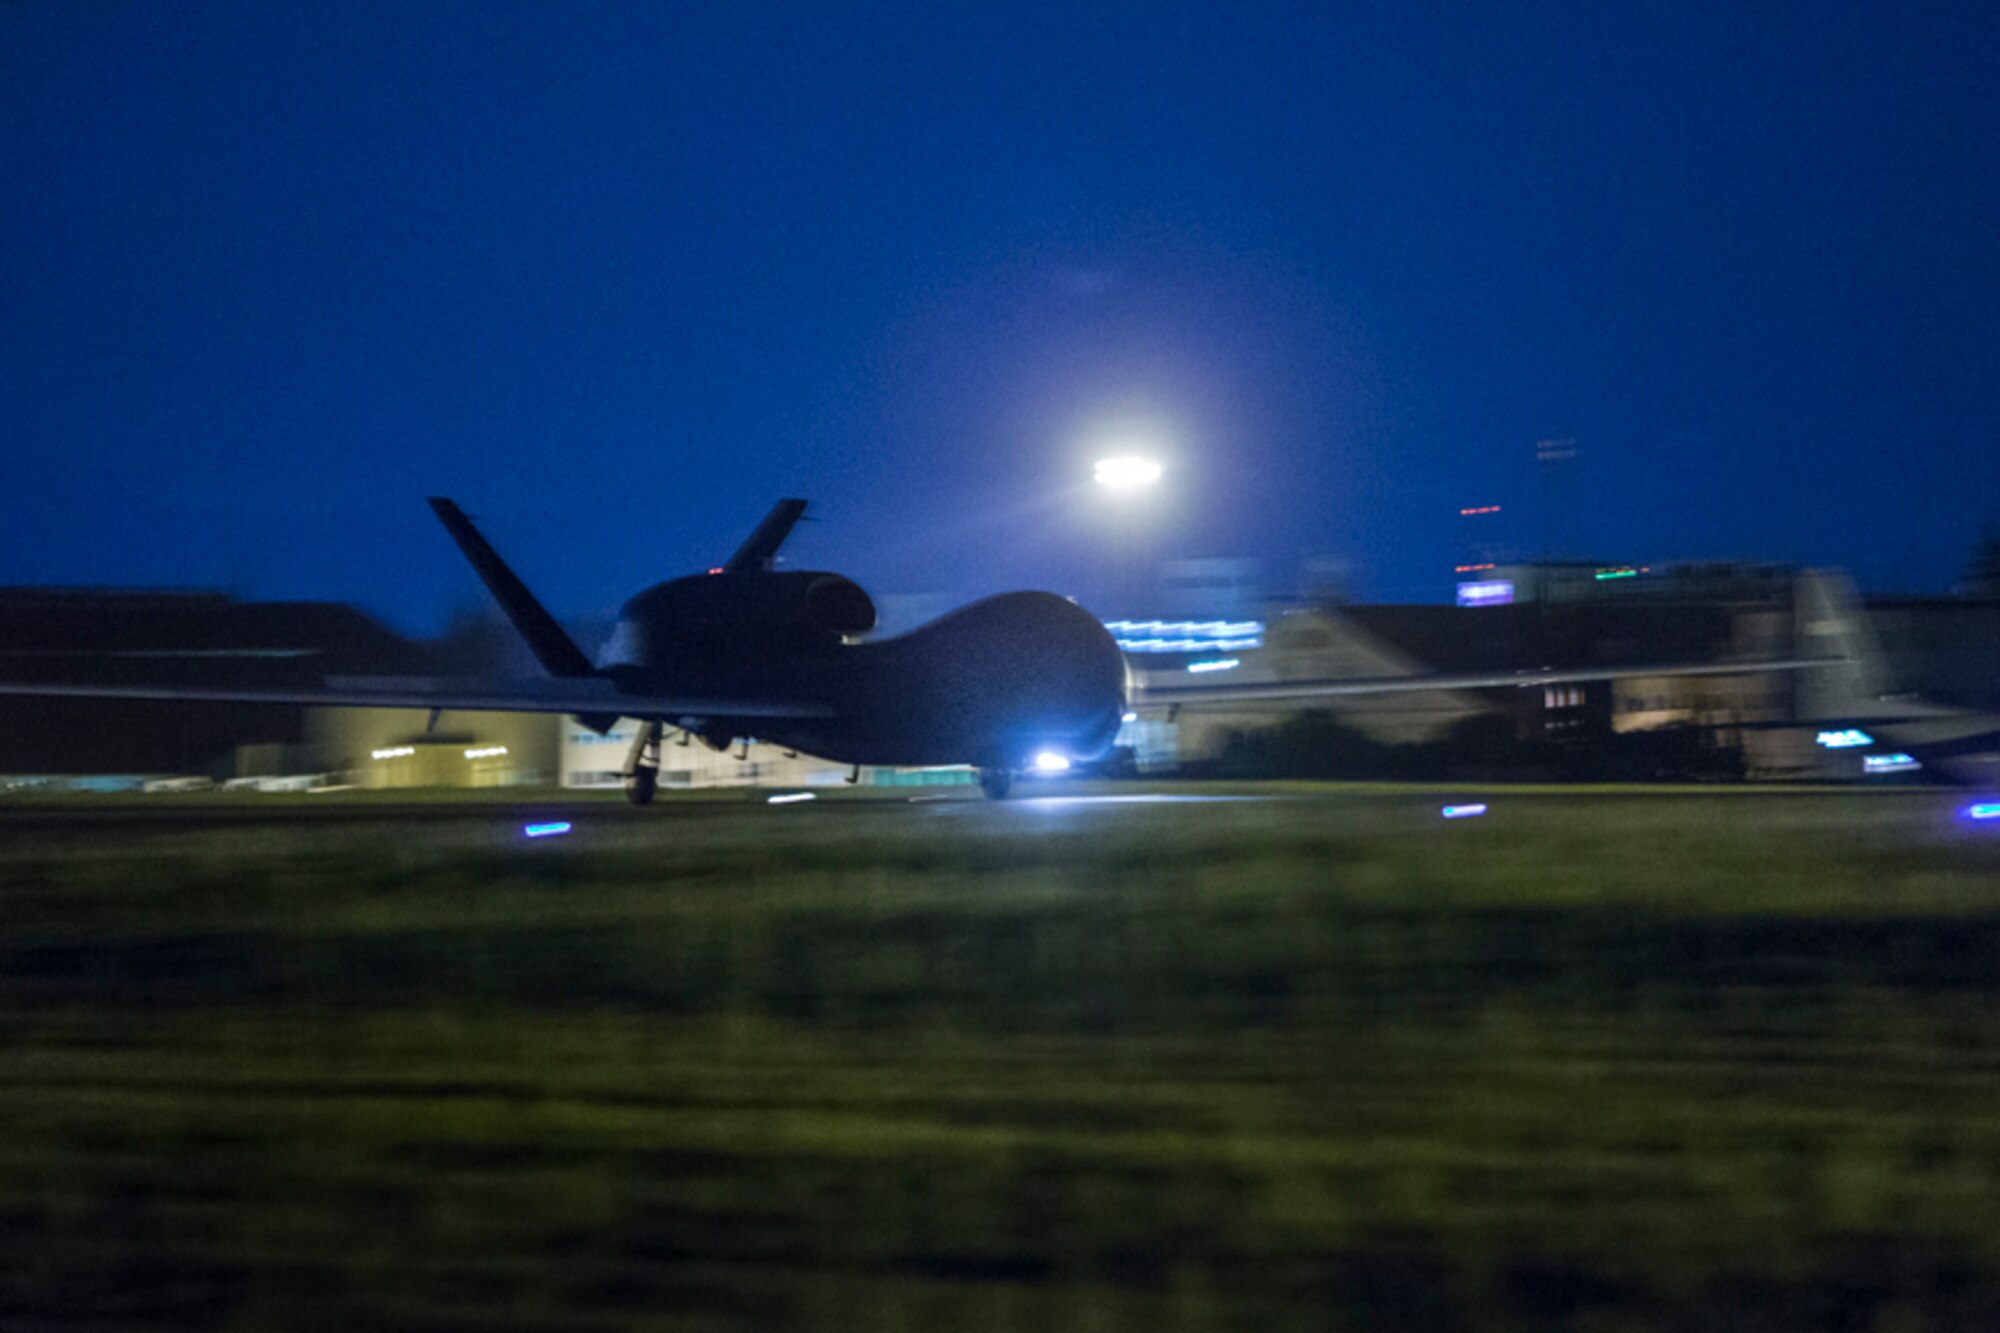 An RQ-4 Global Hawk from Andersen Air Force Base, Guam lands at Yokota Air Base, Japan, May 1, 2017.  The Global Hawk was used for humanitarian assistance and disaster relief efforts during Operation Tomodachi after the 2011 earthquake. (U.S. Air Force photo by Yasuo Osakabe)